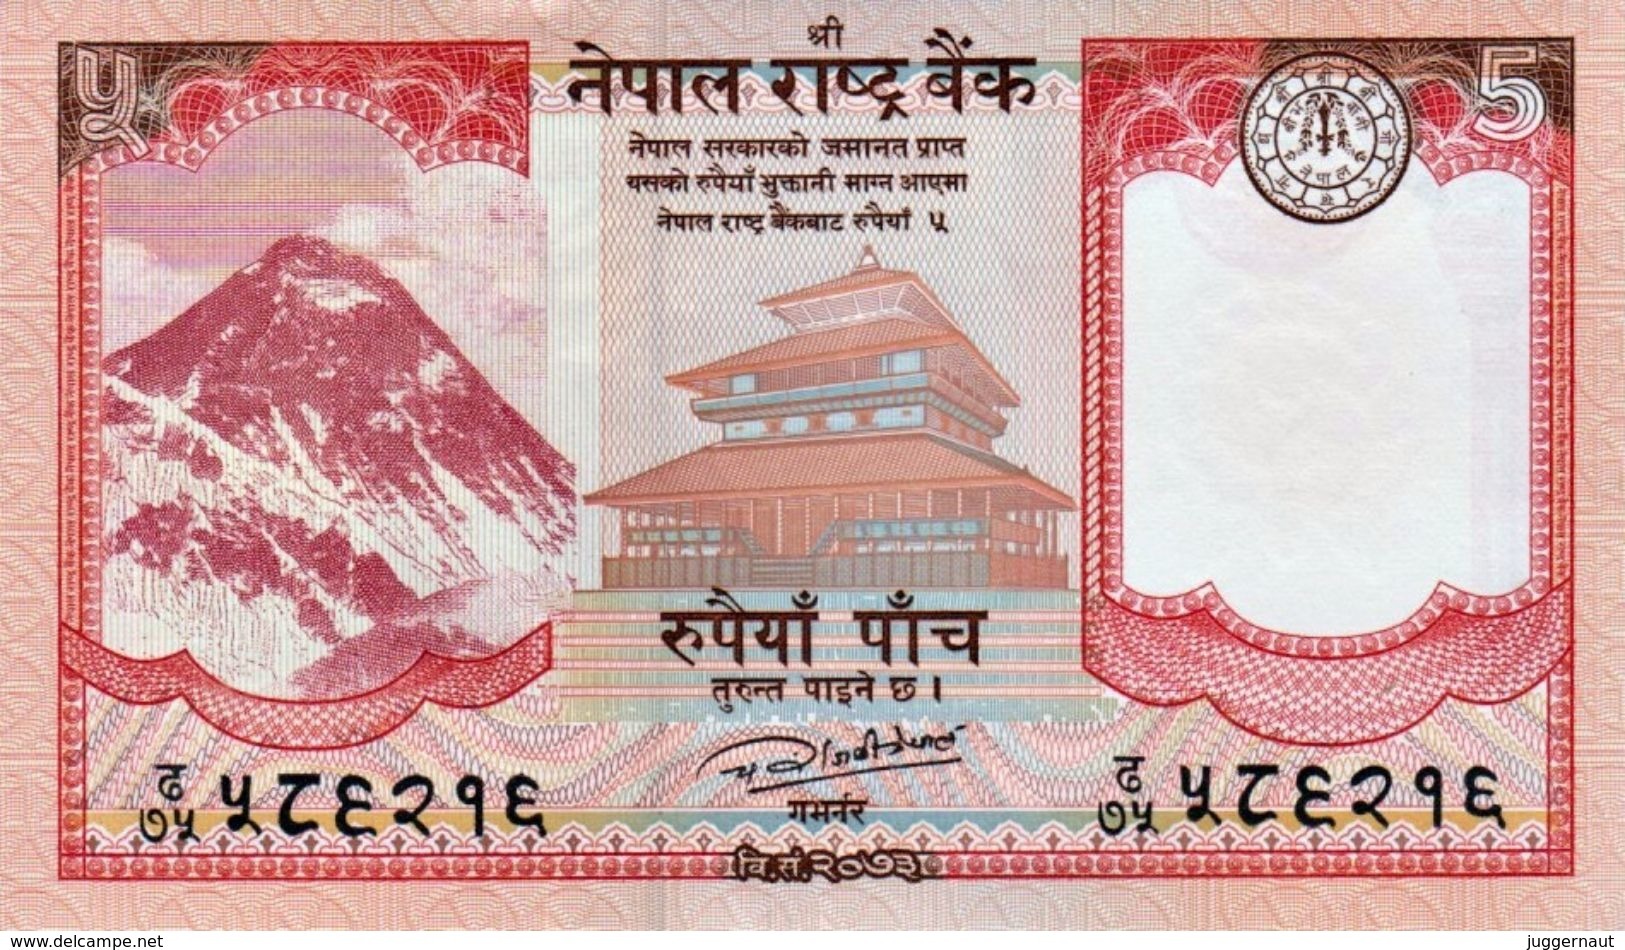 MINT NEPAL RUPEES-5 BANKNOTE 2017 AD MINT UNCIRCULATED UNC - Nepal